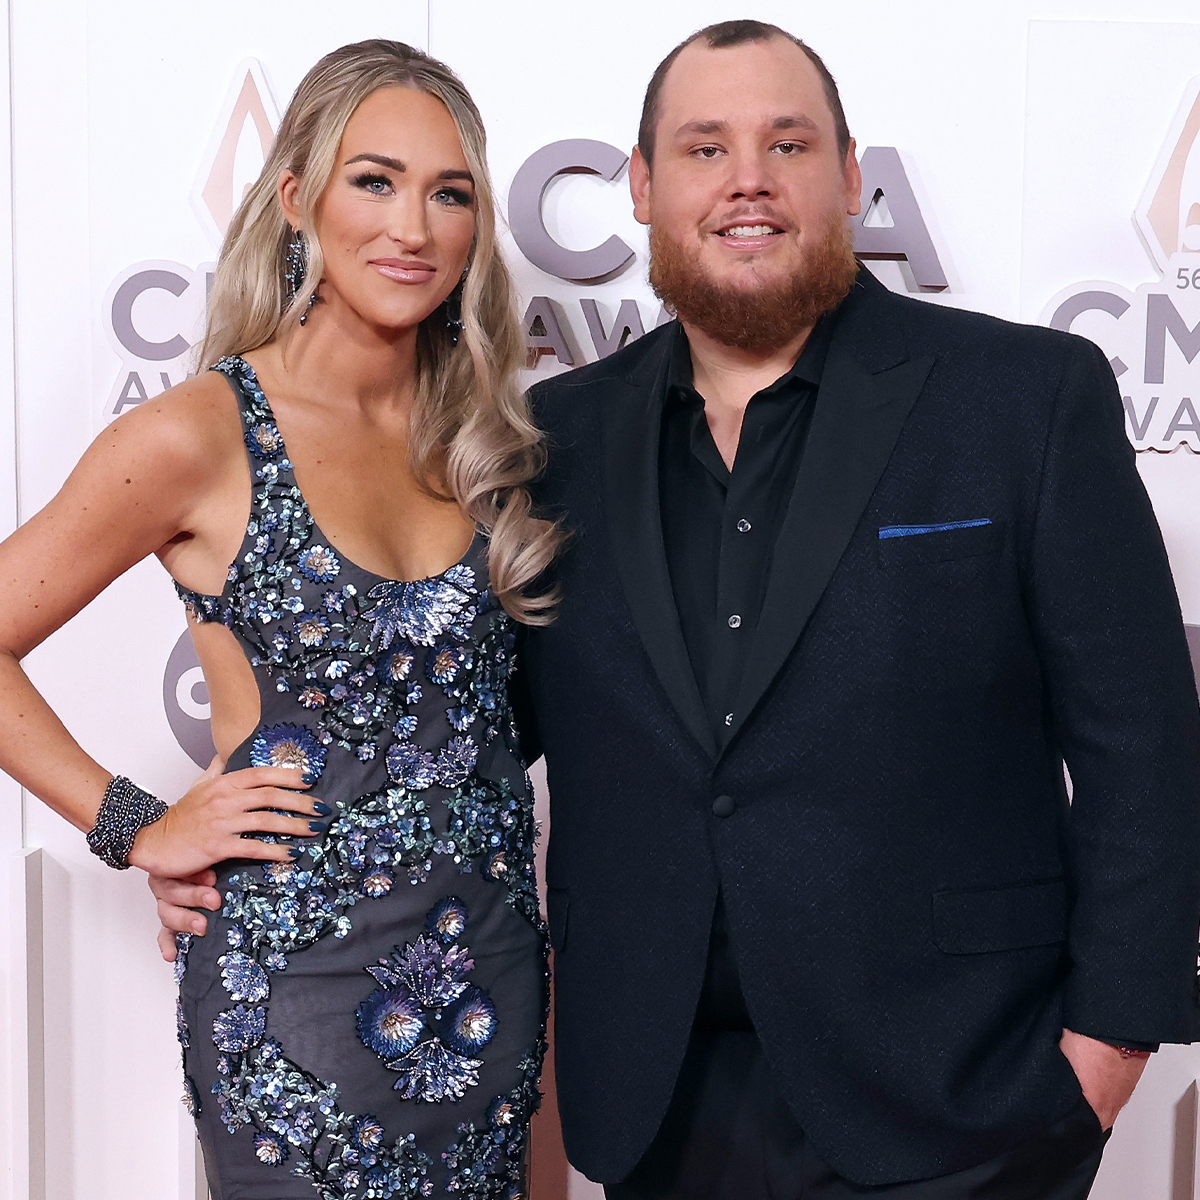 https://akns-images.eonline.com/eol_images/Entire_Site/2023220/rs_1200x1200-230320190521-Nicole-Hocking-and-Luke-Combs-1.jpg?fit=around%7C1200:1200&output-quality=90&crop=1200:1200;center,top